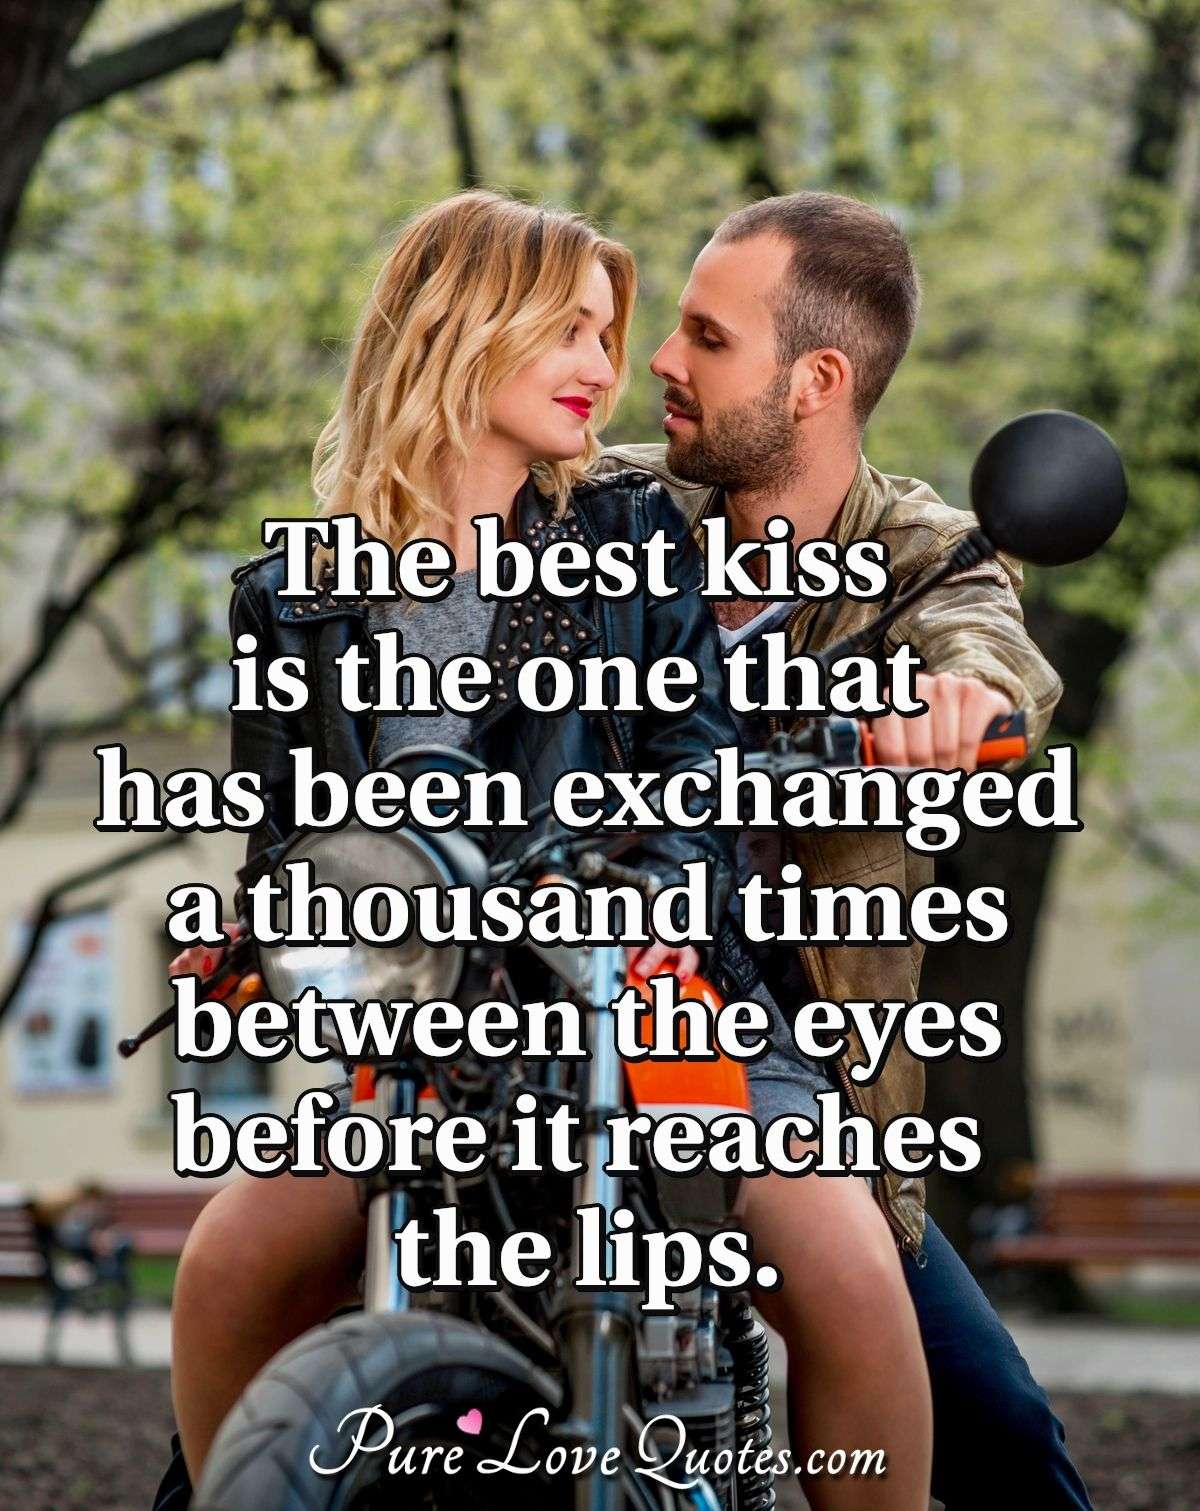 Top 999+ kissing images with quotes – Amazing Collection kissing images ...